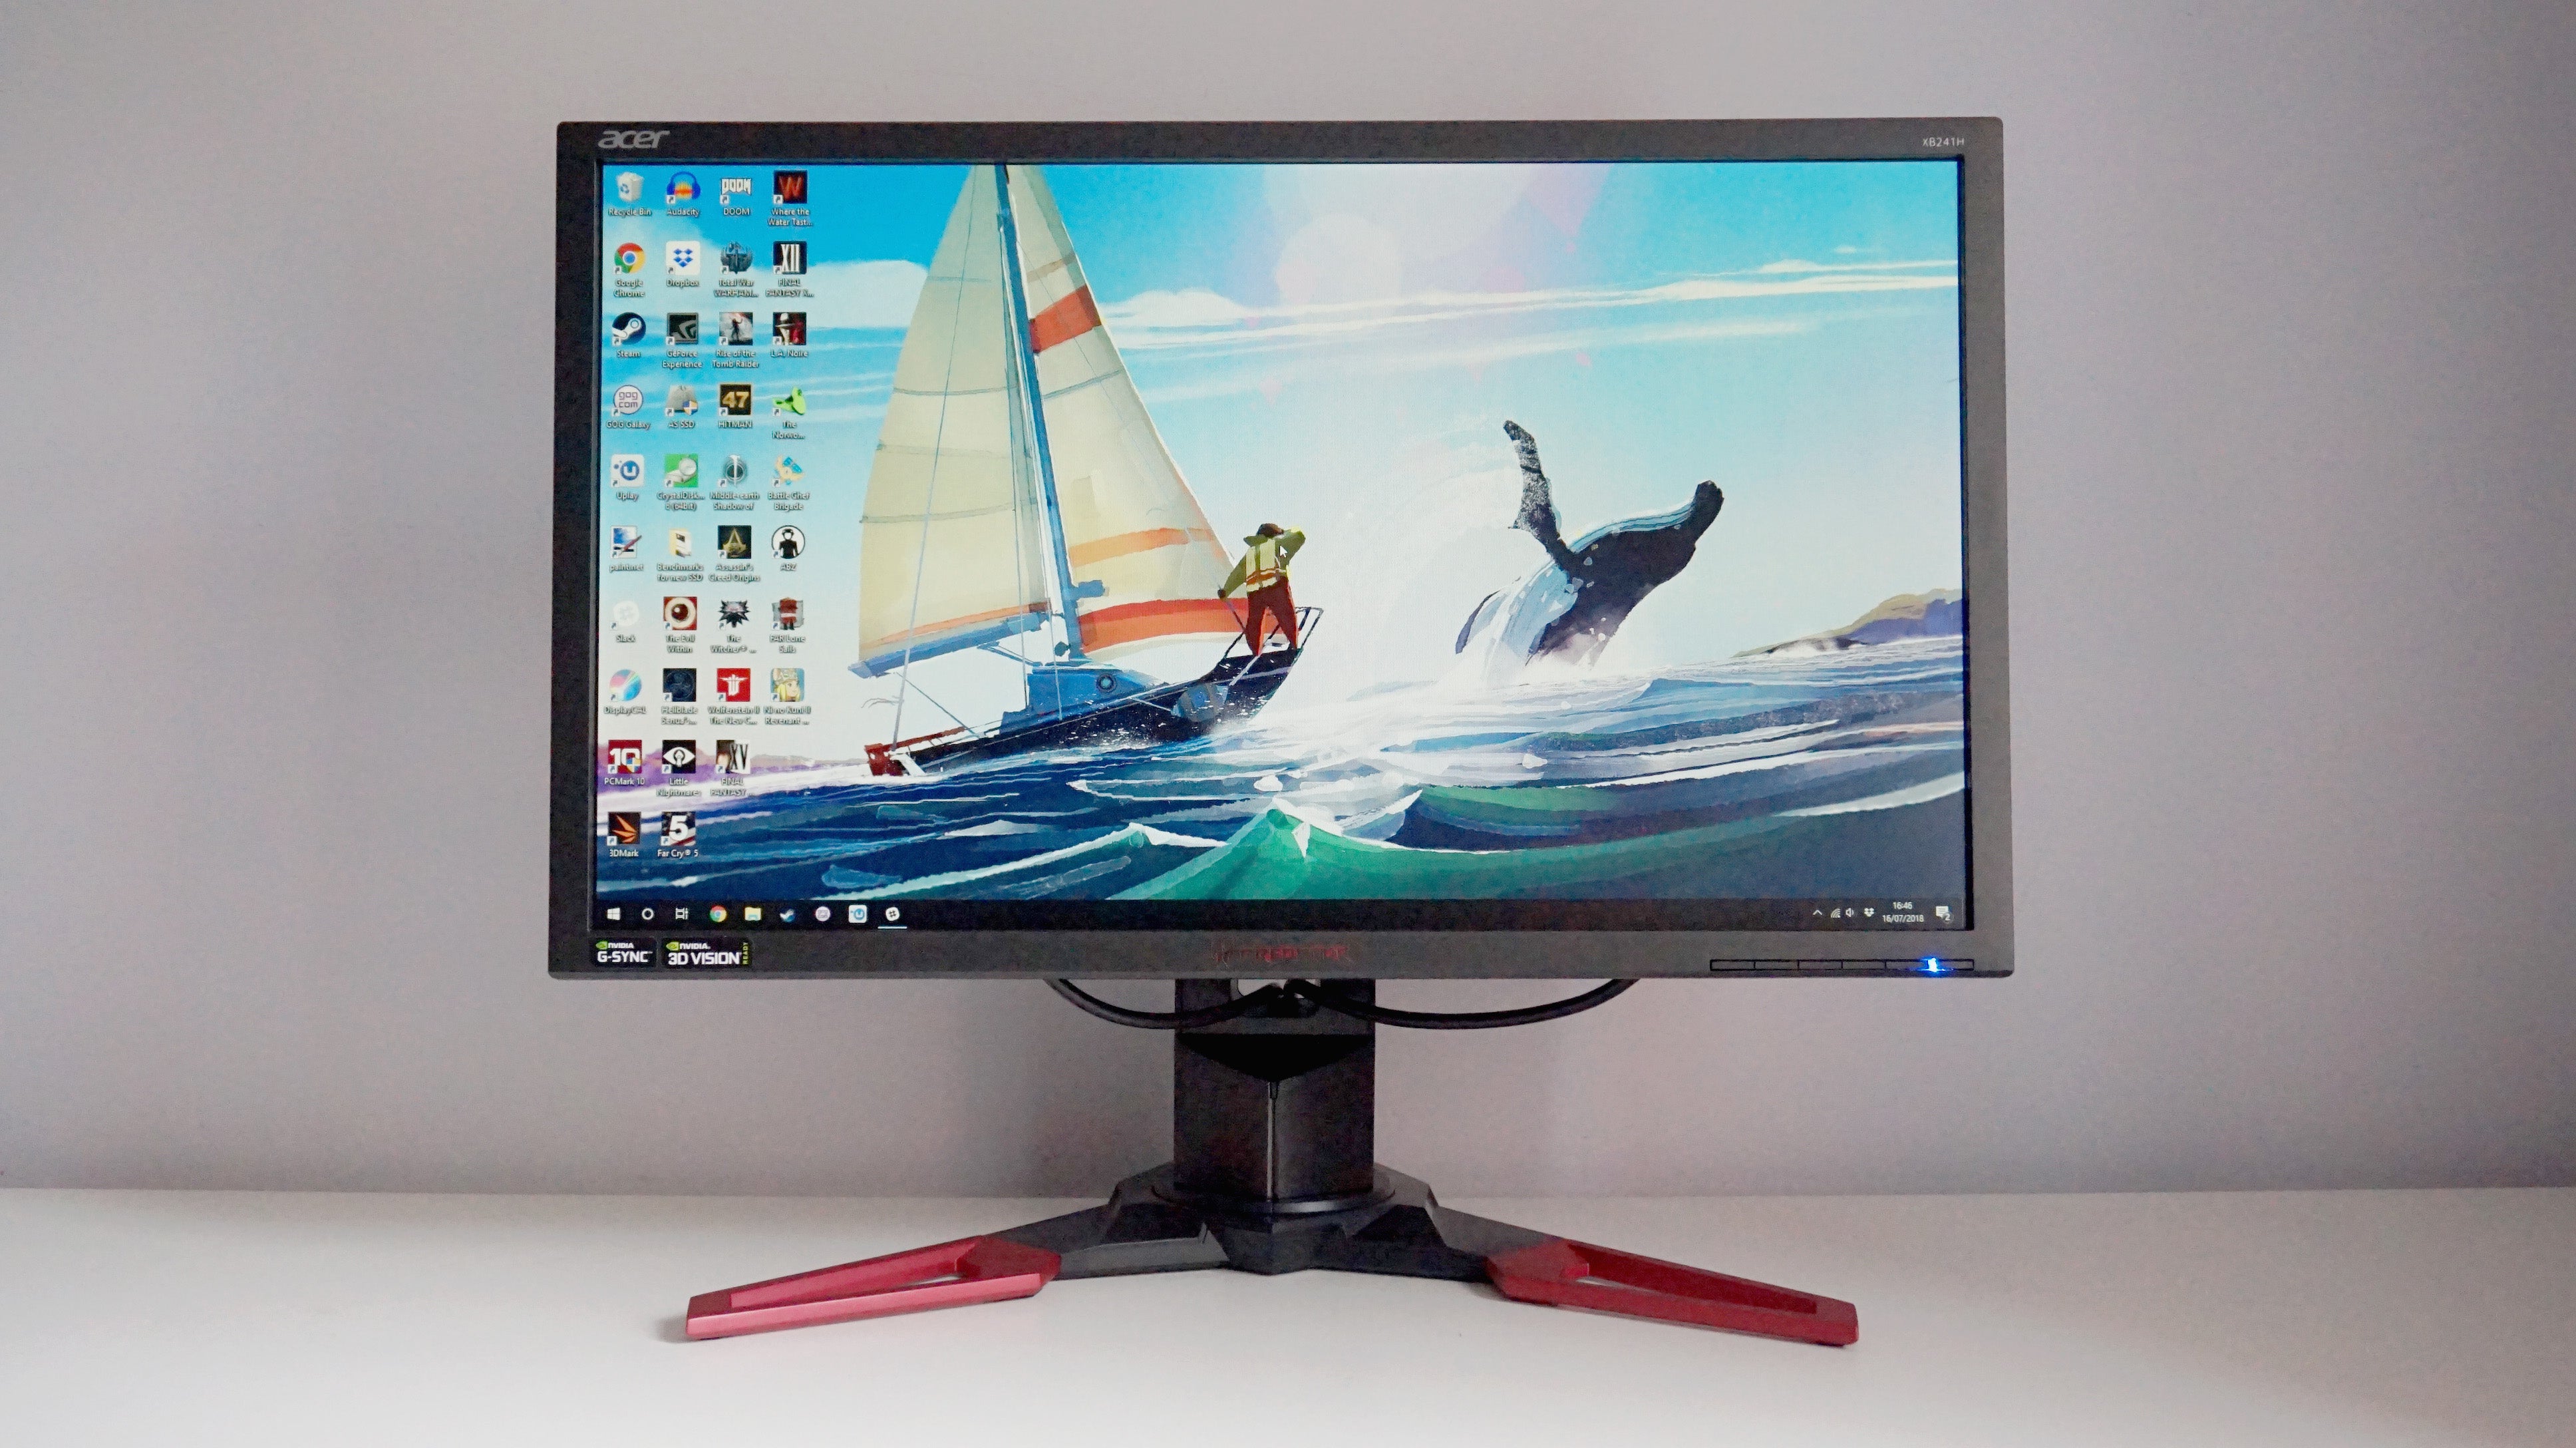 A photo of the Acer Predator XB241H gaming monitor